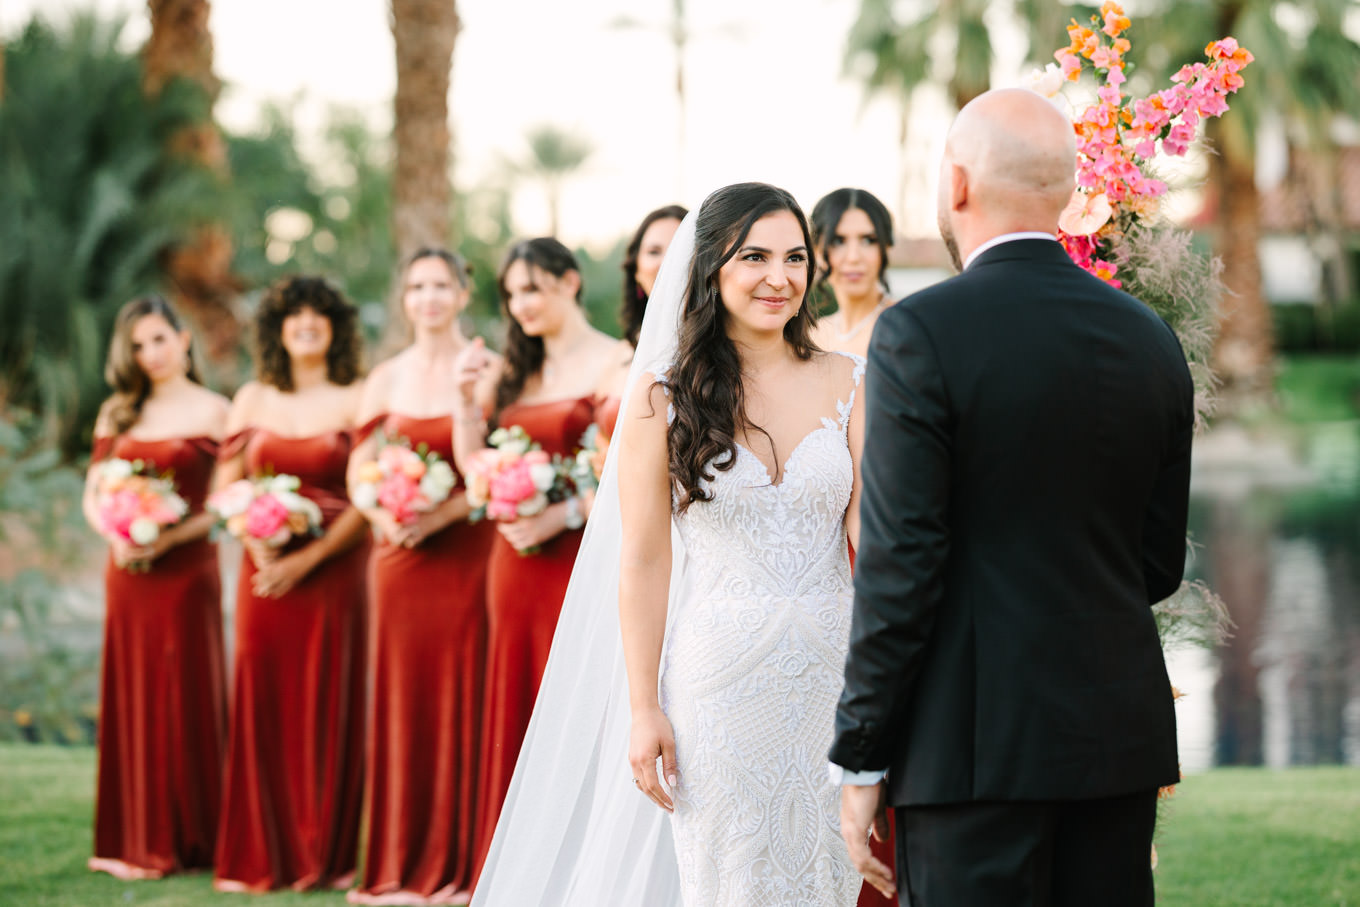 Couple during ceremony | Pink Bougainvillea Estate wedding | Colorful LA wedding photography | #bougainvilleaestate #palmspringswedding #palmspringsweddingvenue #palmspringsphotographer Source: Mary Costa Photography | Los Angeles